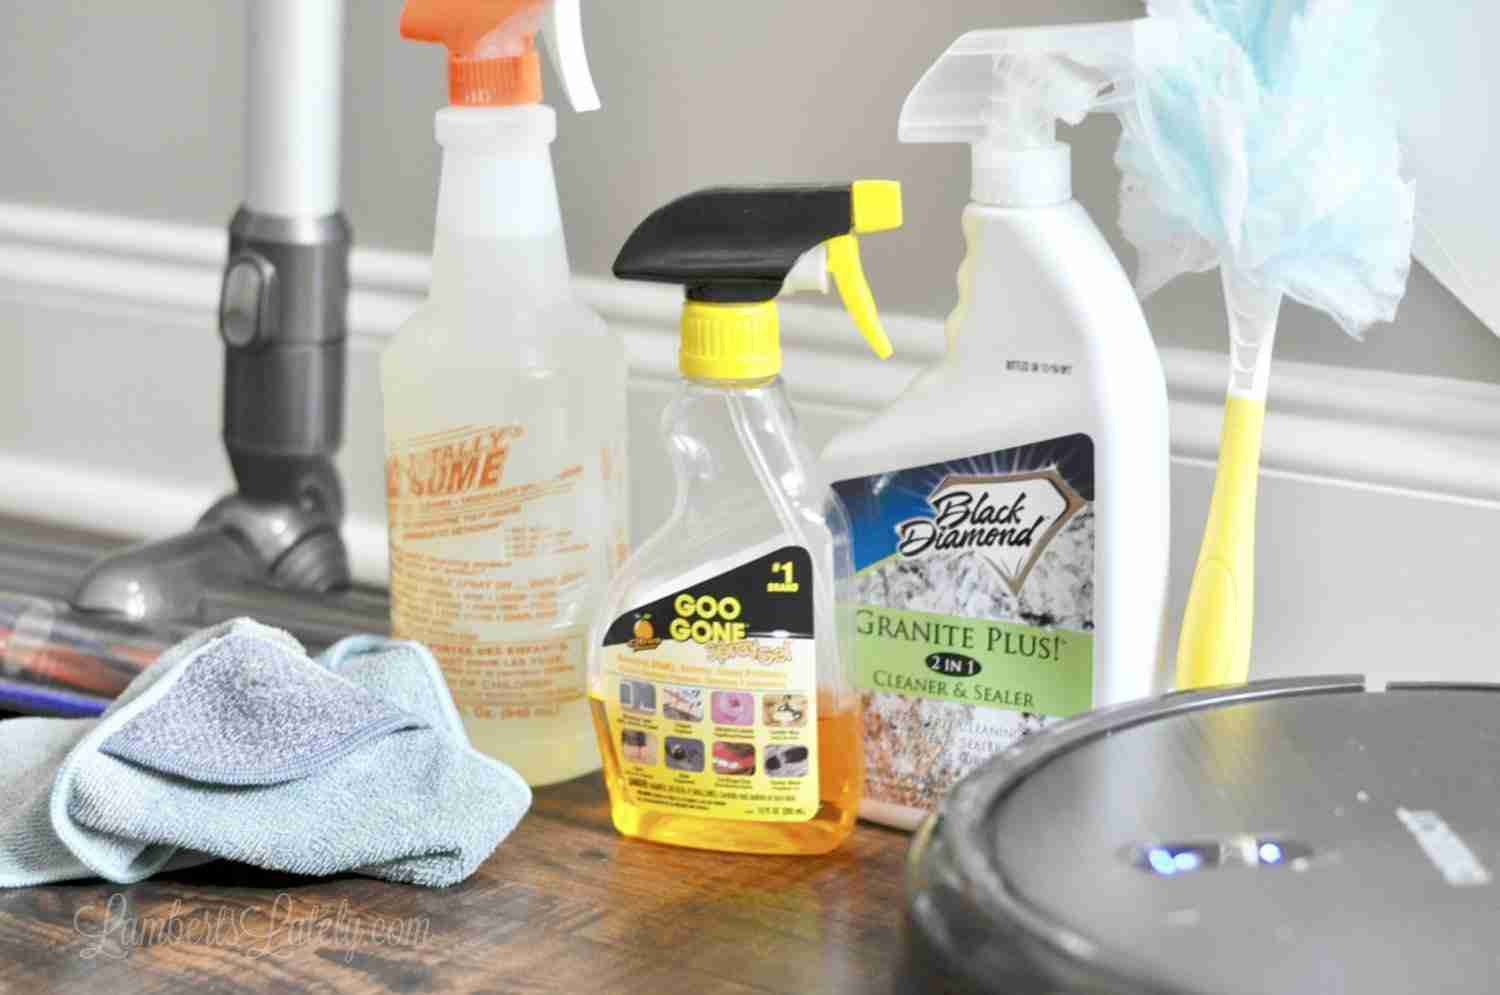 This list of everyday household cleaning supplies has products you will use on a daily & weekly basis to keep your home tidy! Includes ideas for cleaning the kitchen, bathroom, floors, and home exterior.